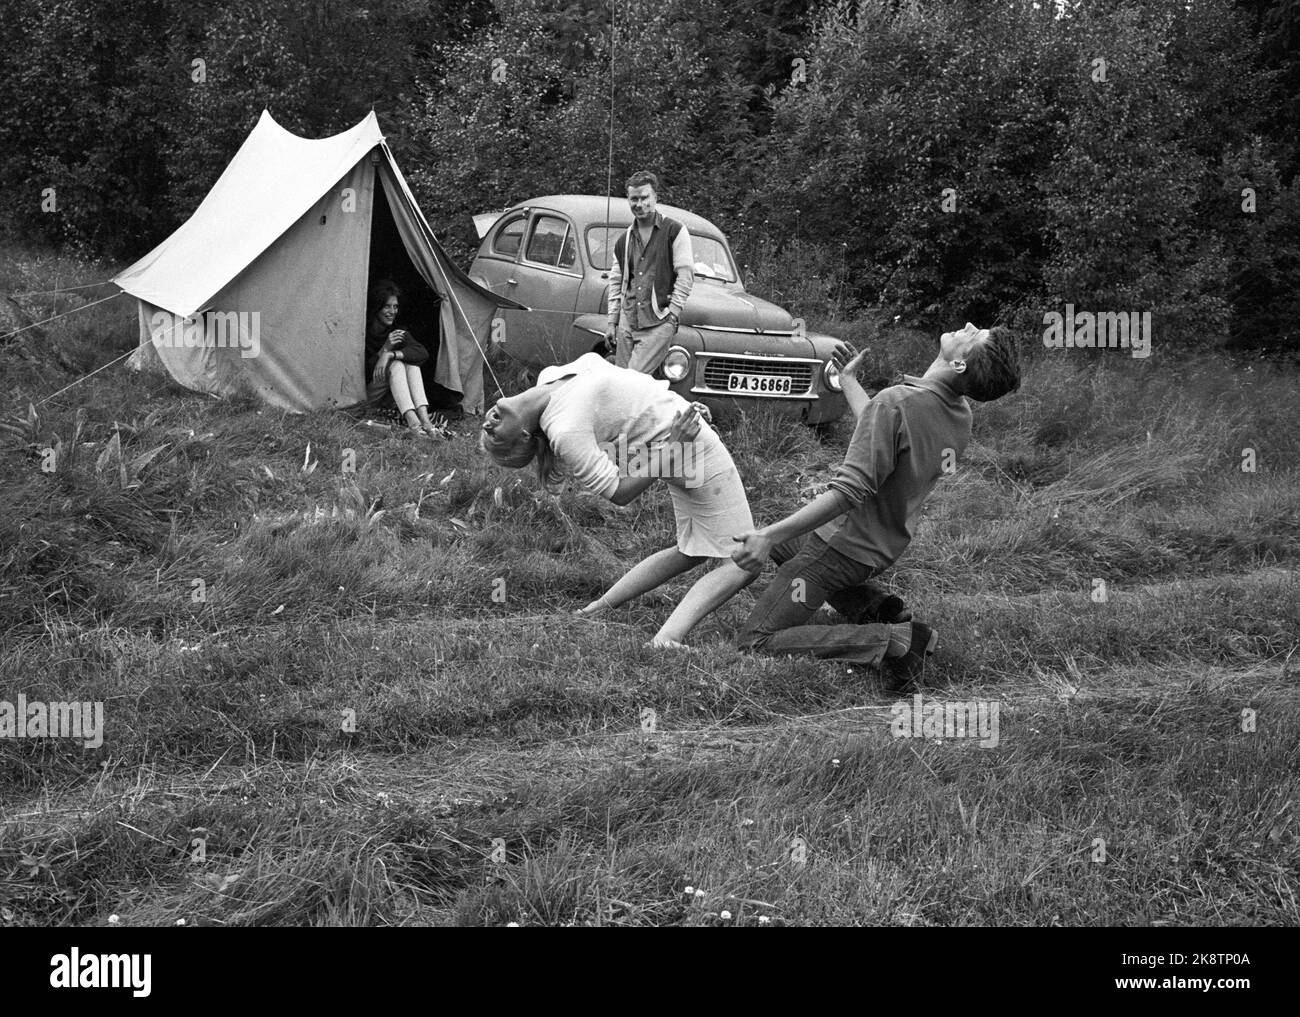 Karlskoga, August 1963, Sweden. 30 - 40,000 young people, including some raggers, take Karlskoga to look at cannon race (car race). Police are meeting strong to keep calm in the city. Here from the campsite where the youth lived in a tent. A couple from Stockholm dances the hottest dance of the time, Twist. Photo: Ivar Aaserud / Current / NTB Stock Photo